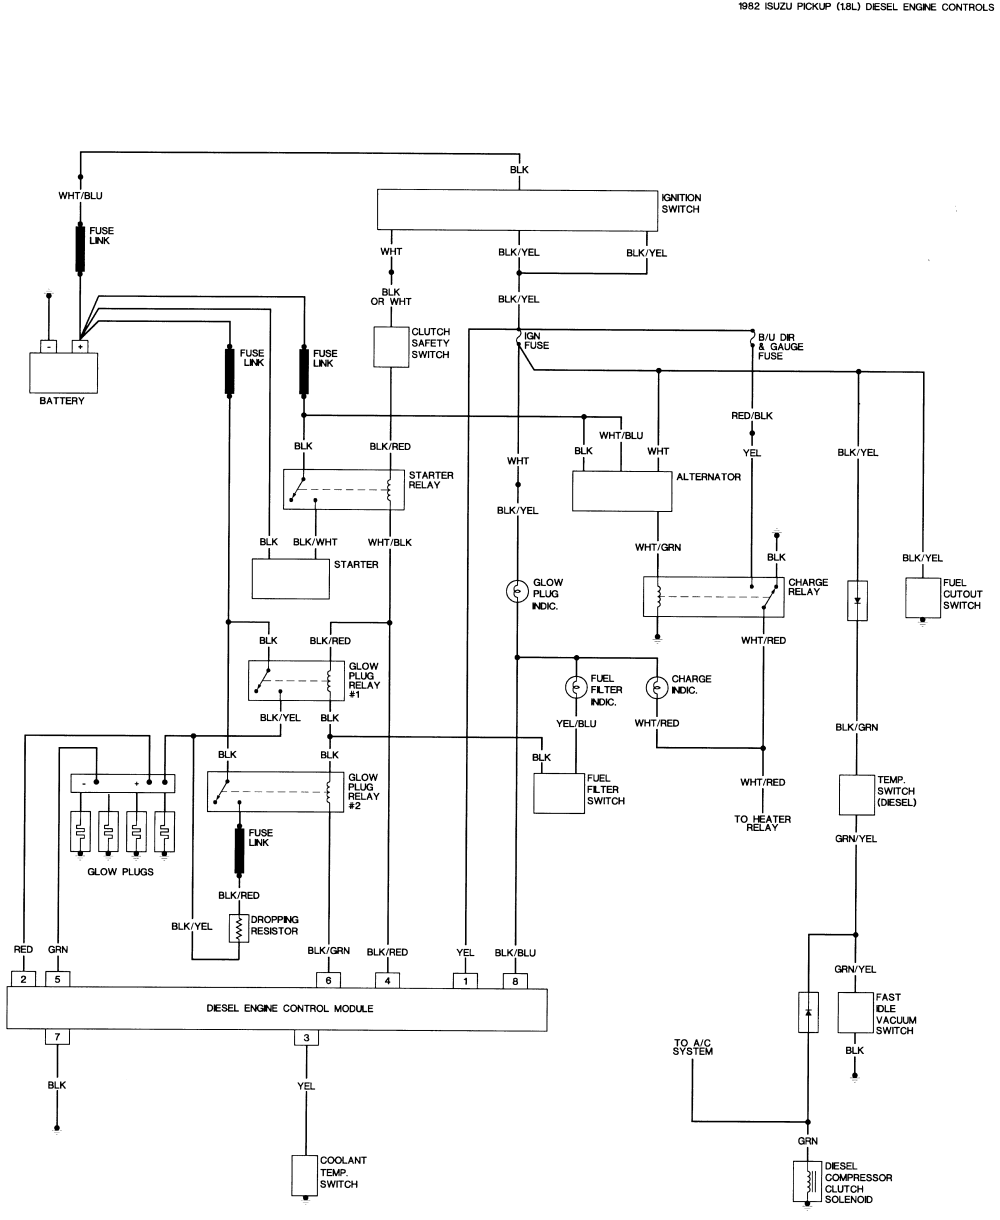 97 rodeo stereo wiring diagram